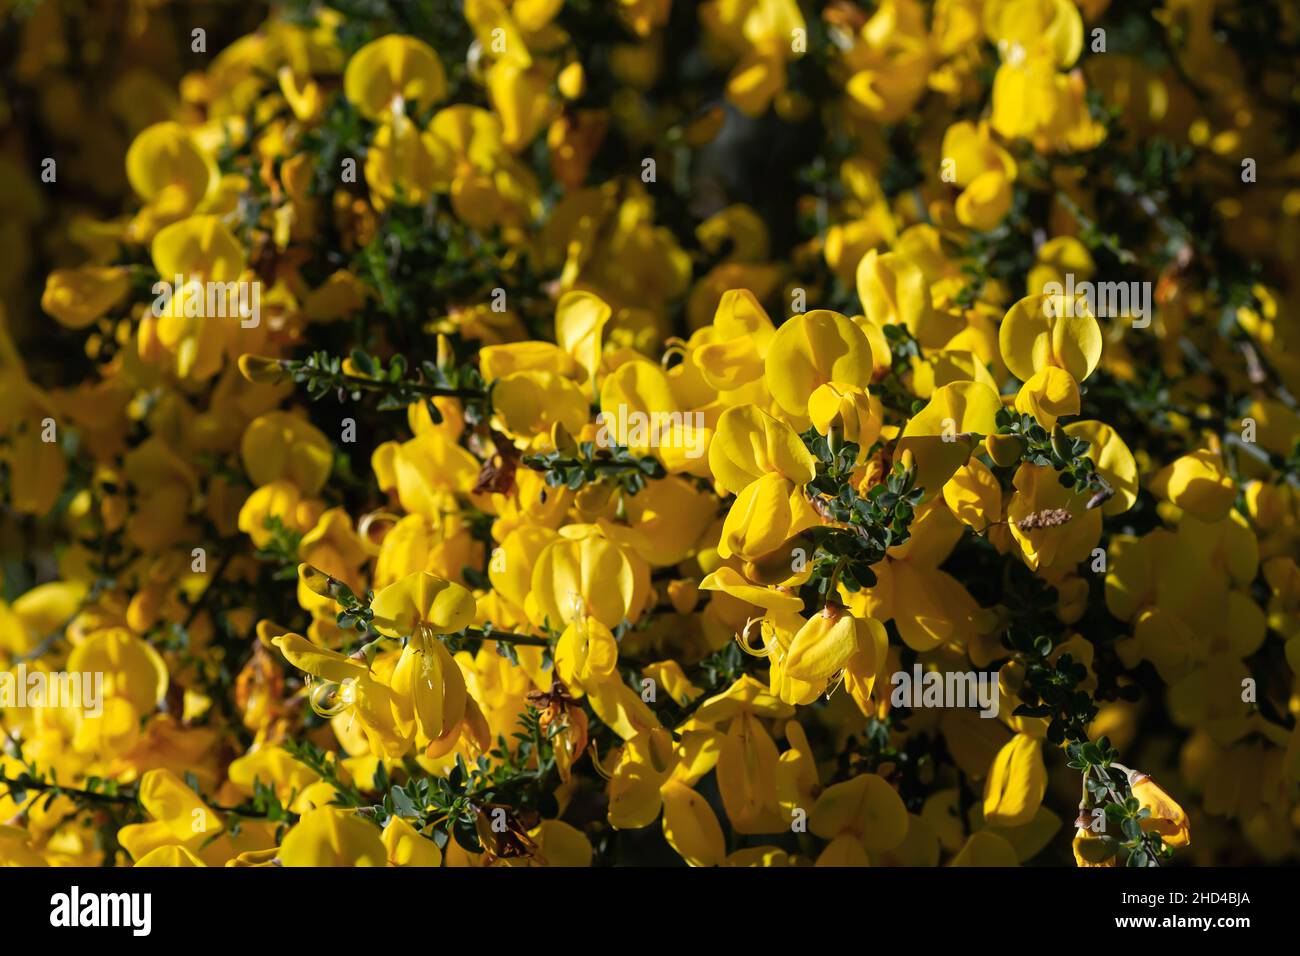 Cytisus scoparius or Scotch broom yellow flowers blooming in spring Stock Photo